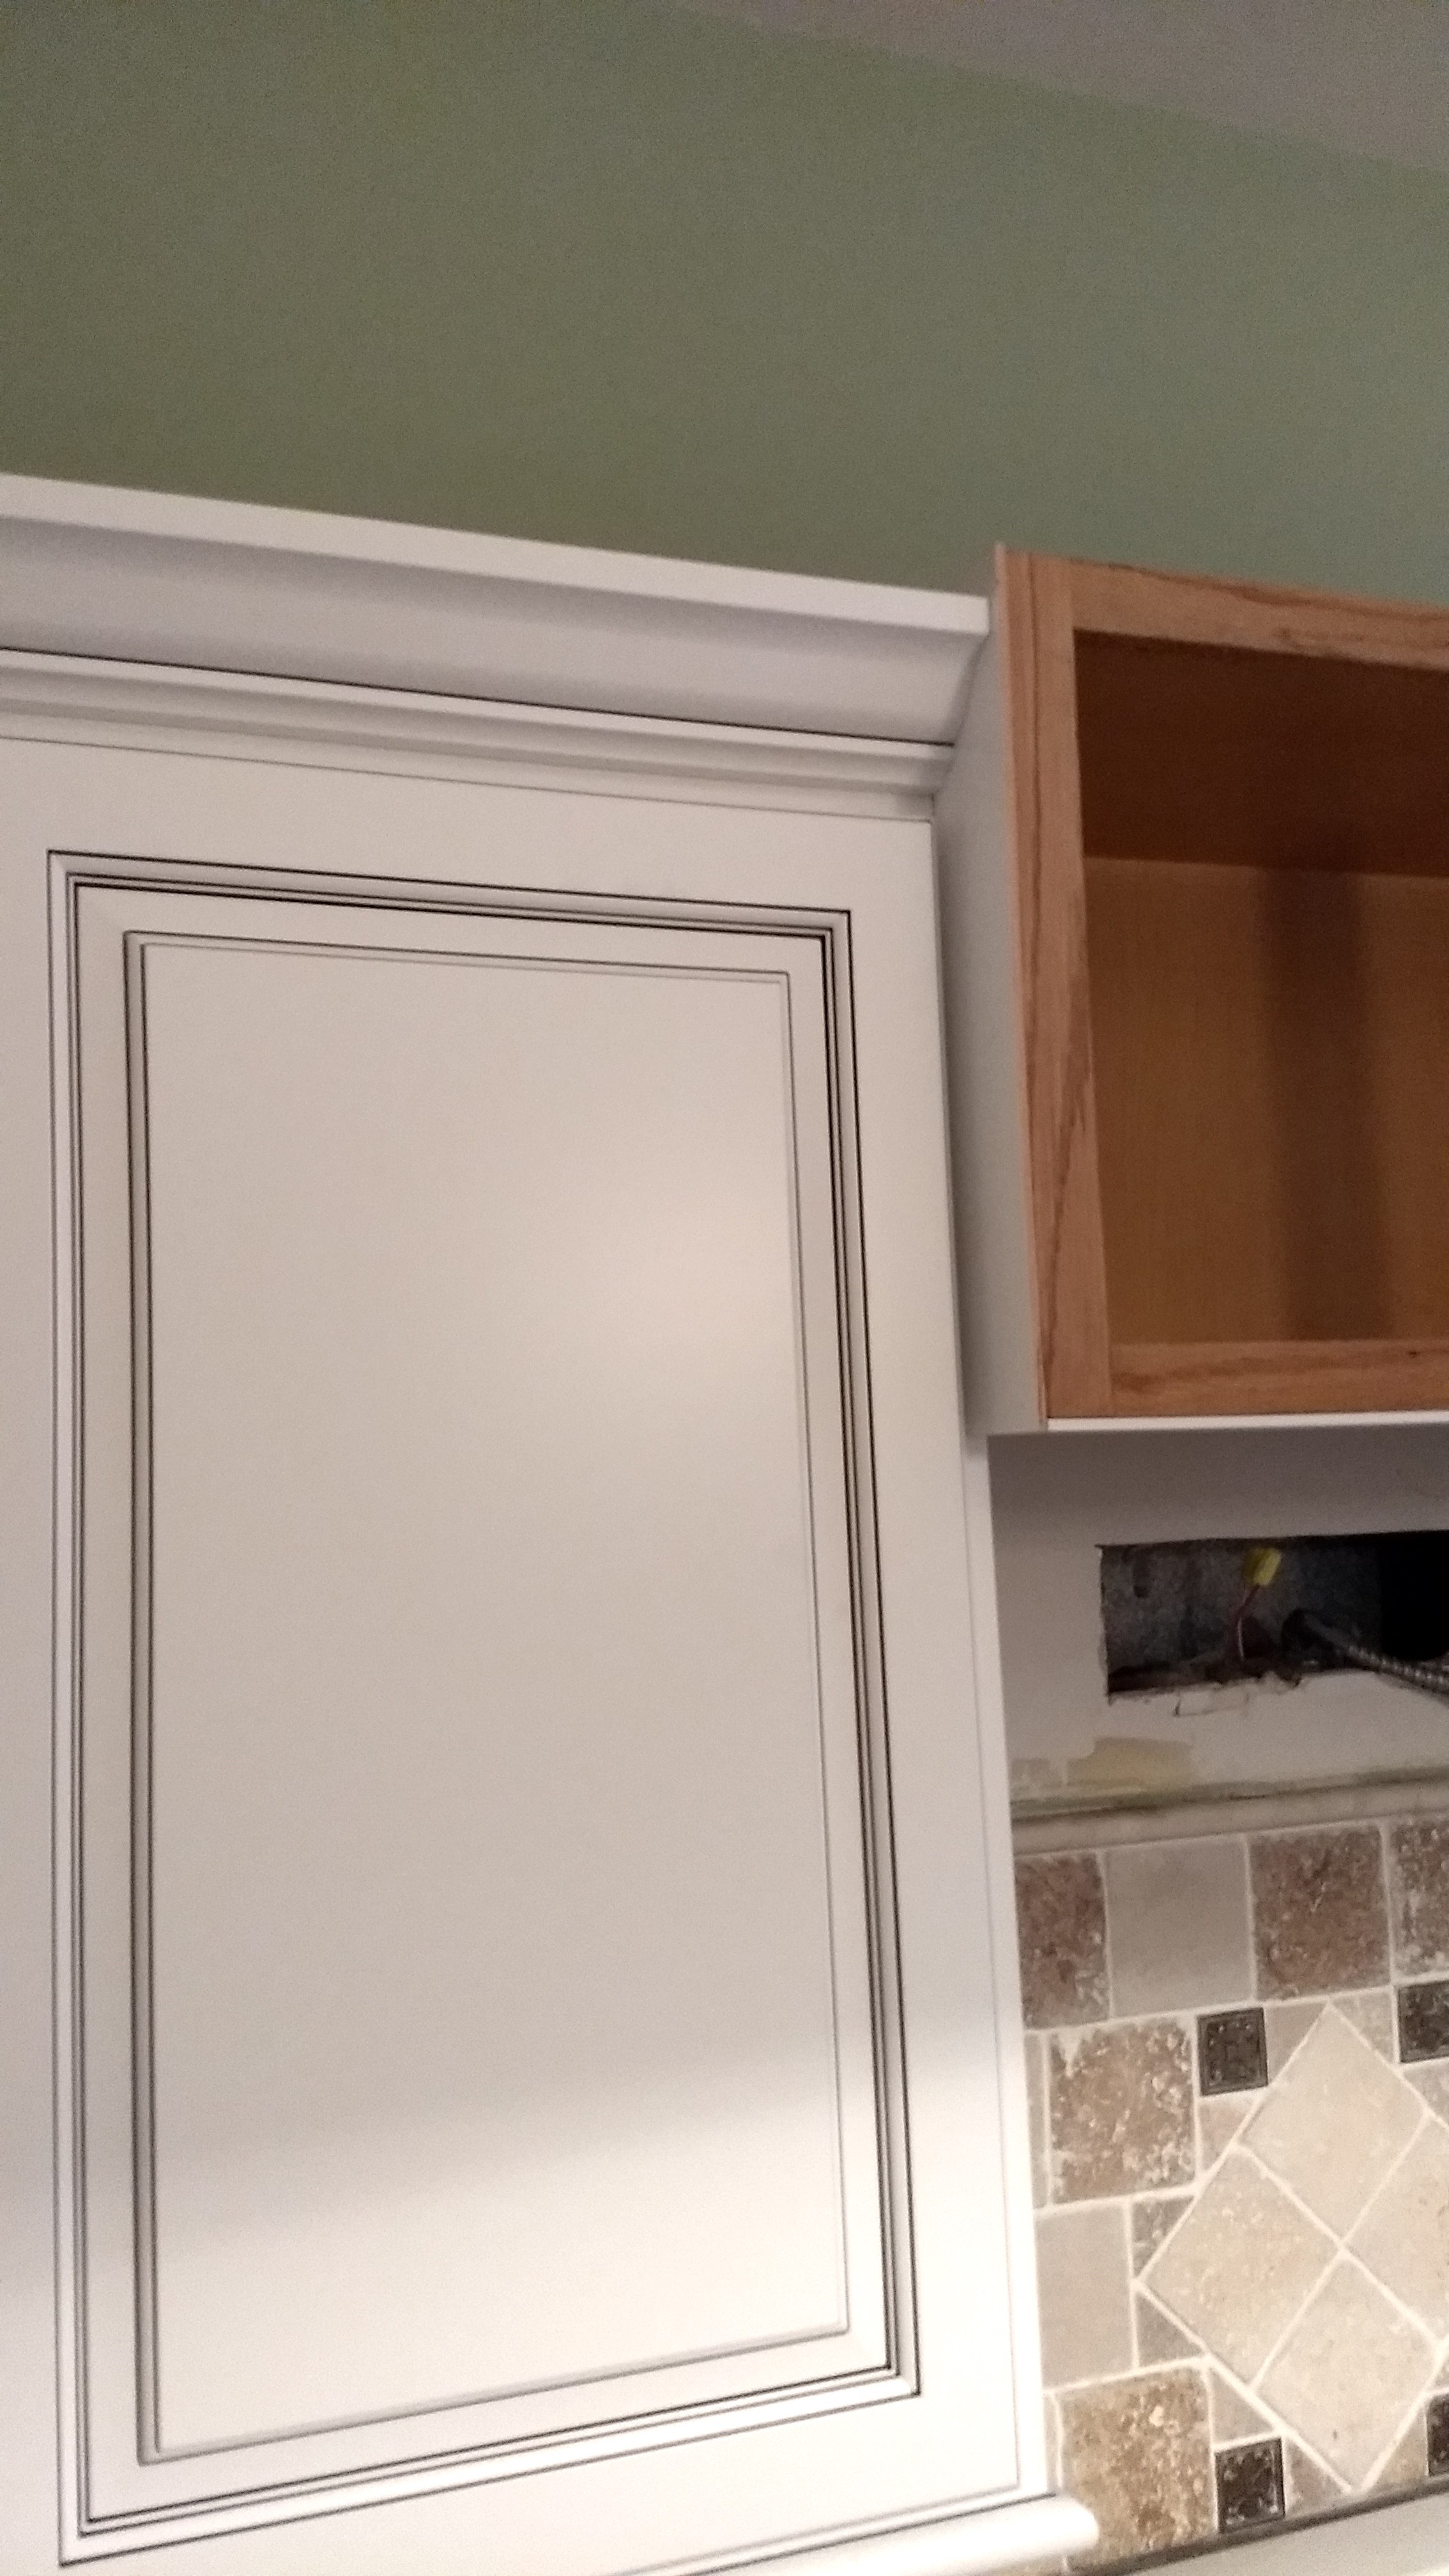 Step 6: You can see I've refaced the cabinet on the side and the new crown molding can end neatly into the side of the center cabinet